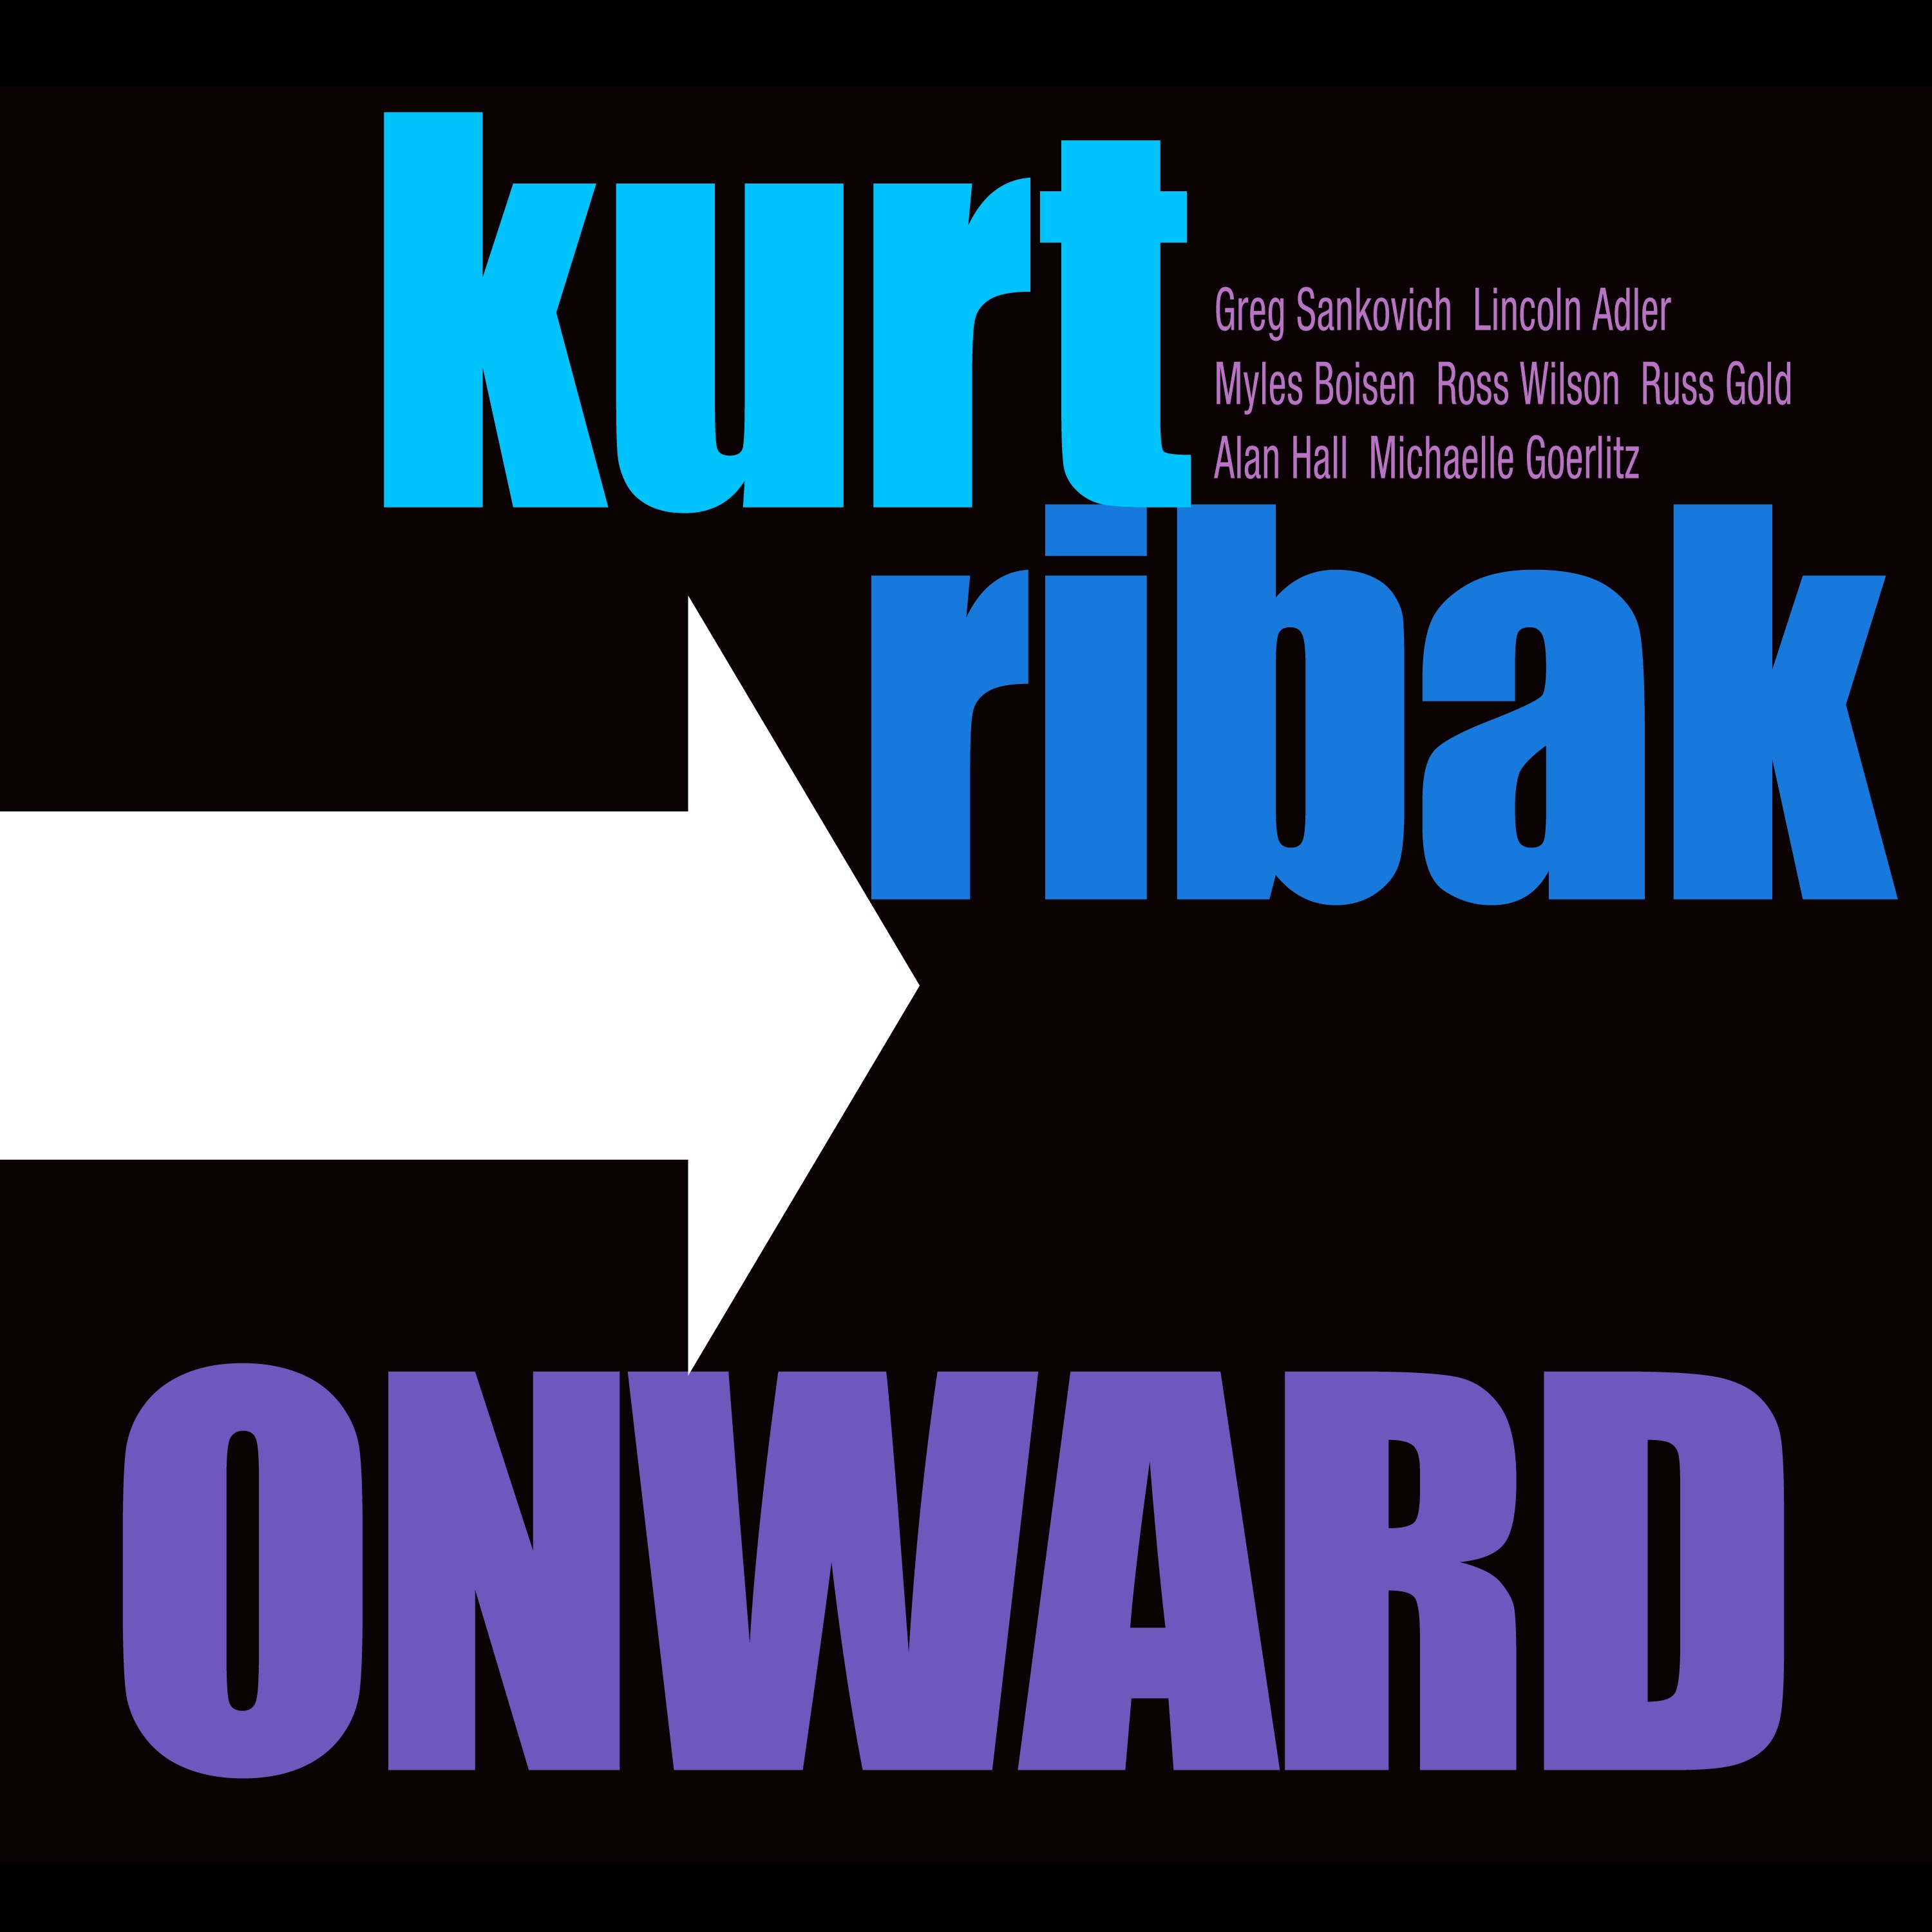 "onward" record cover